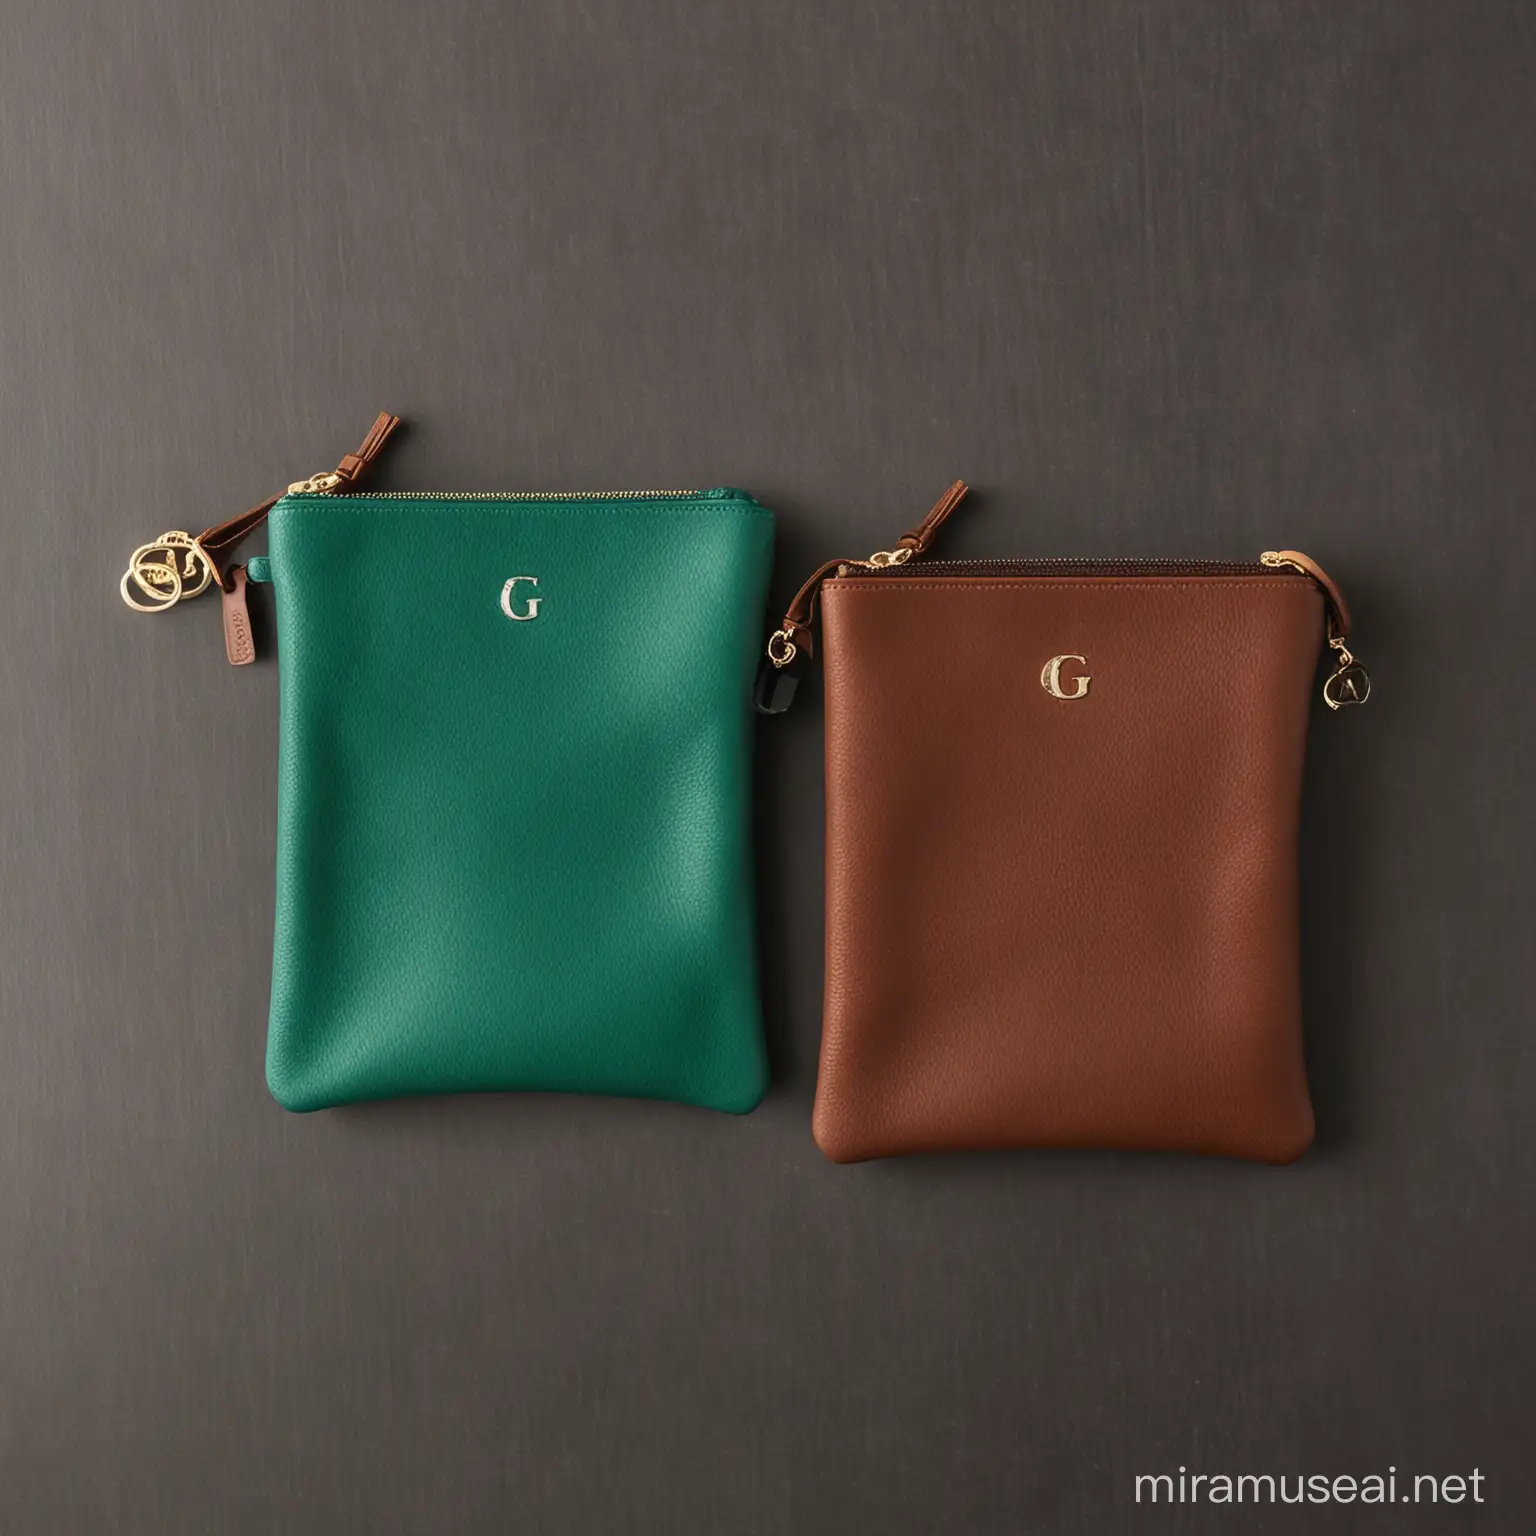 Luxury Travel Pouch Duo in Emerald Green and Espresso Brown with G Charm Zipper Pulls